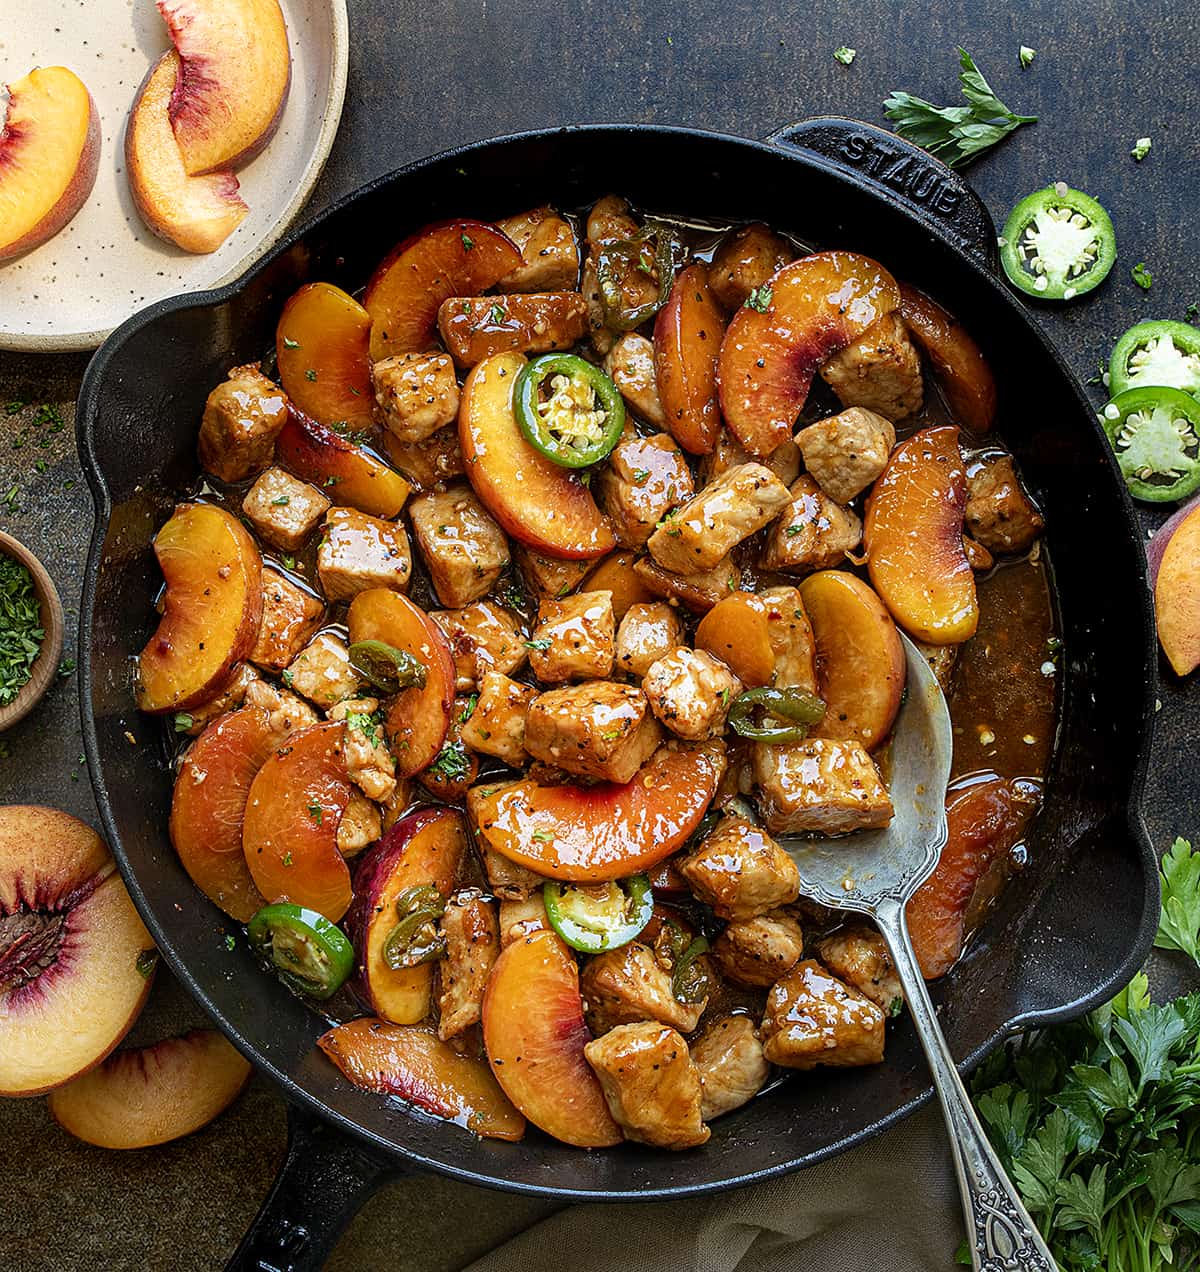 Skillet of Jalapeno Peach Pork Bites on a Dark Table with Fresh Peaches from Overhead. 